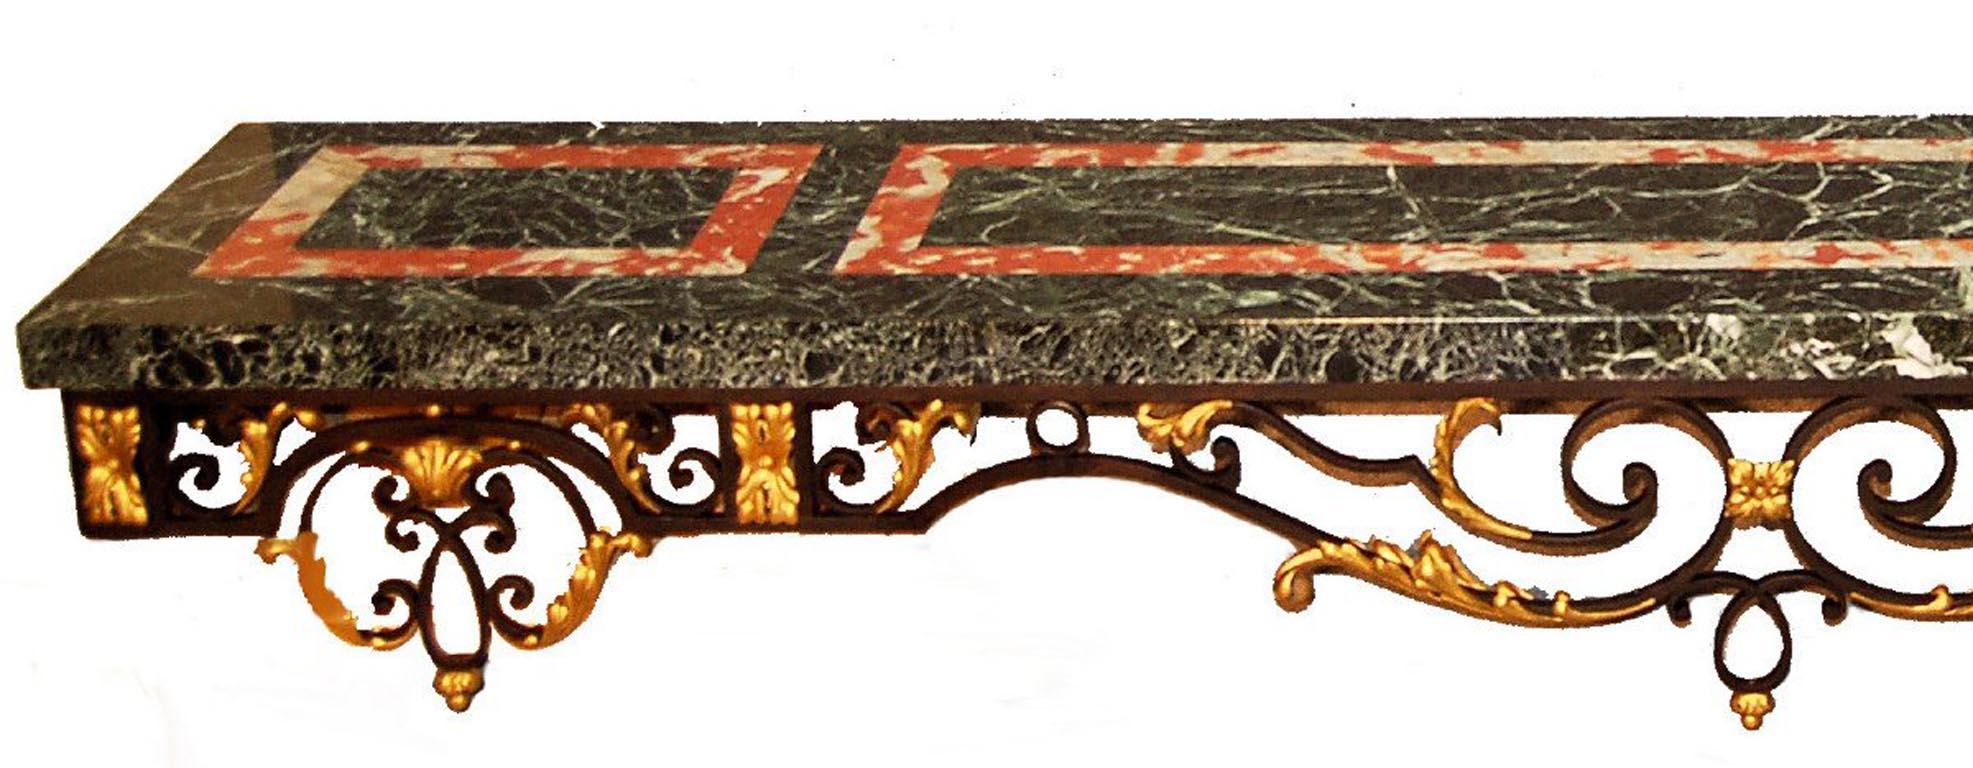 Important and exceptional Baroque style wrought iron console with black and gold patina. Important green marble top with royal red marble inlays. The construction is traditional technique. Period late nineteenth century.
Weight about 300 kg, 660